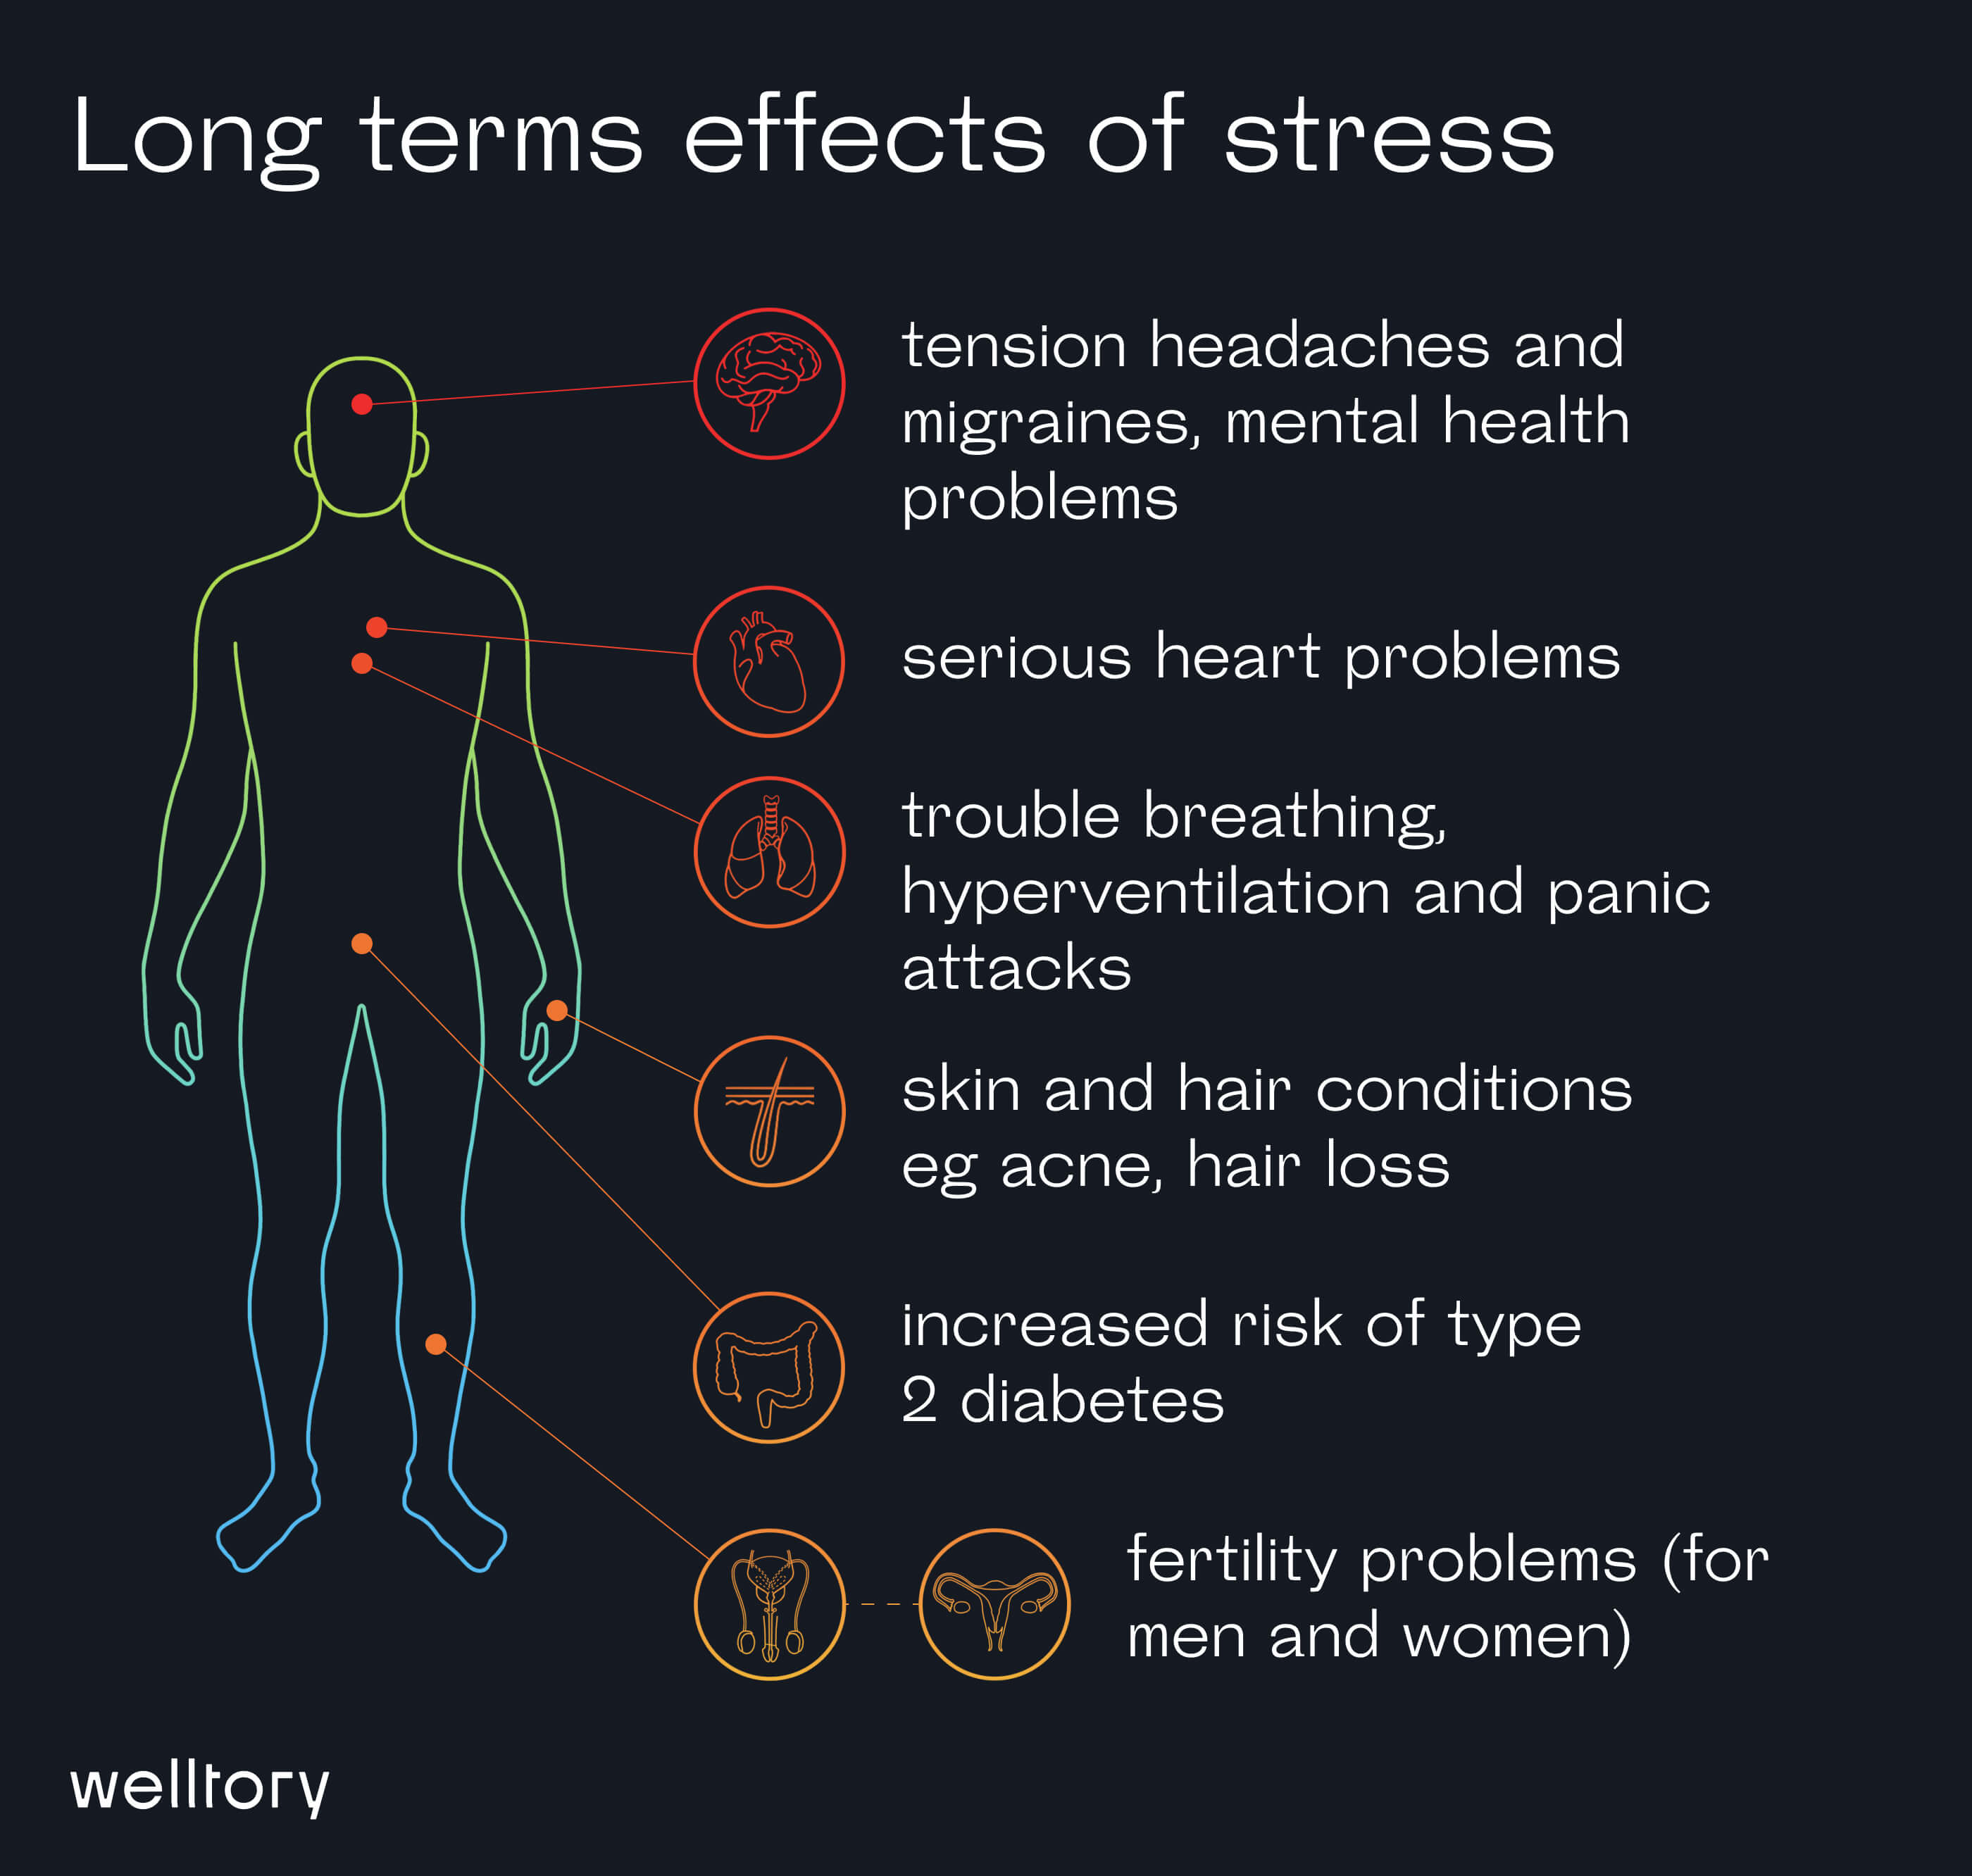 Long term effects of stress